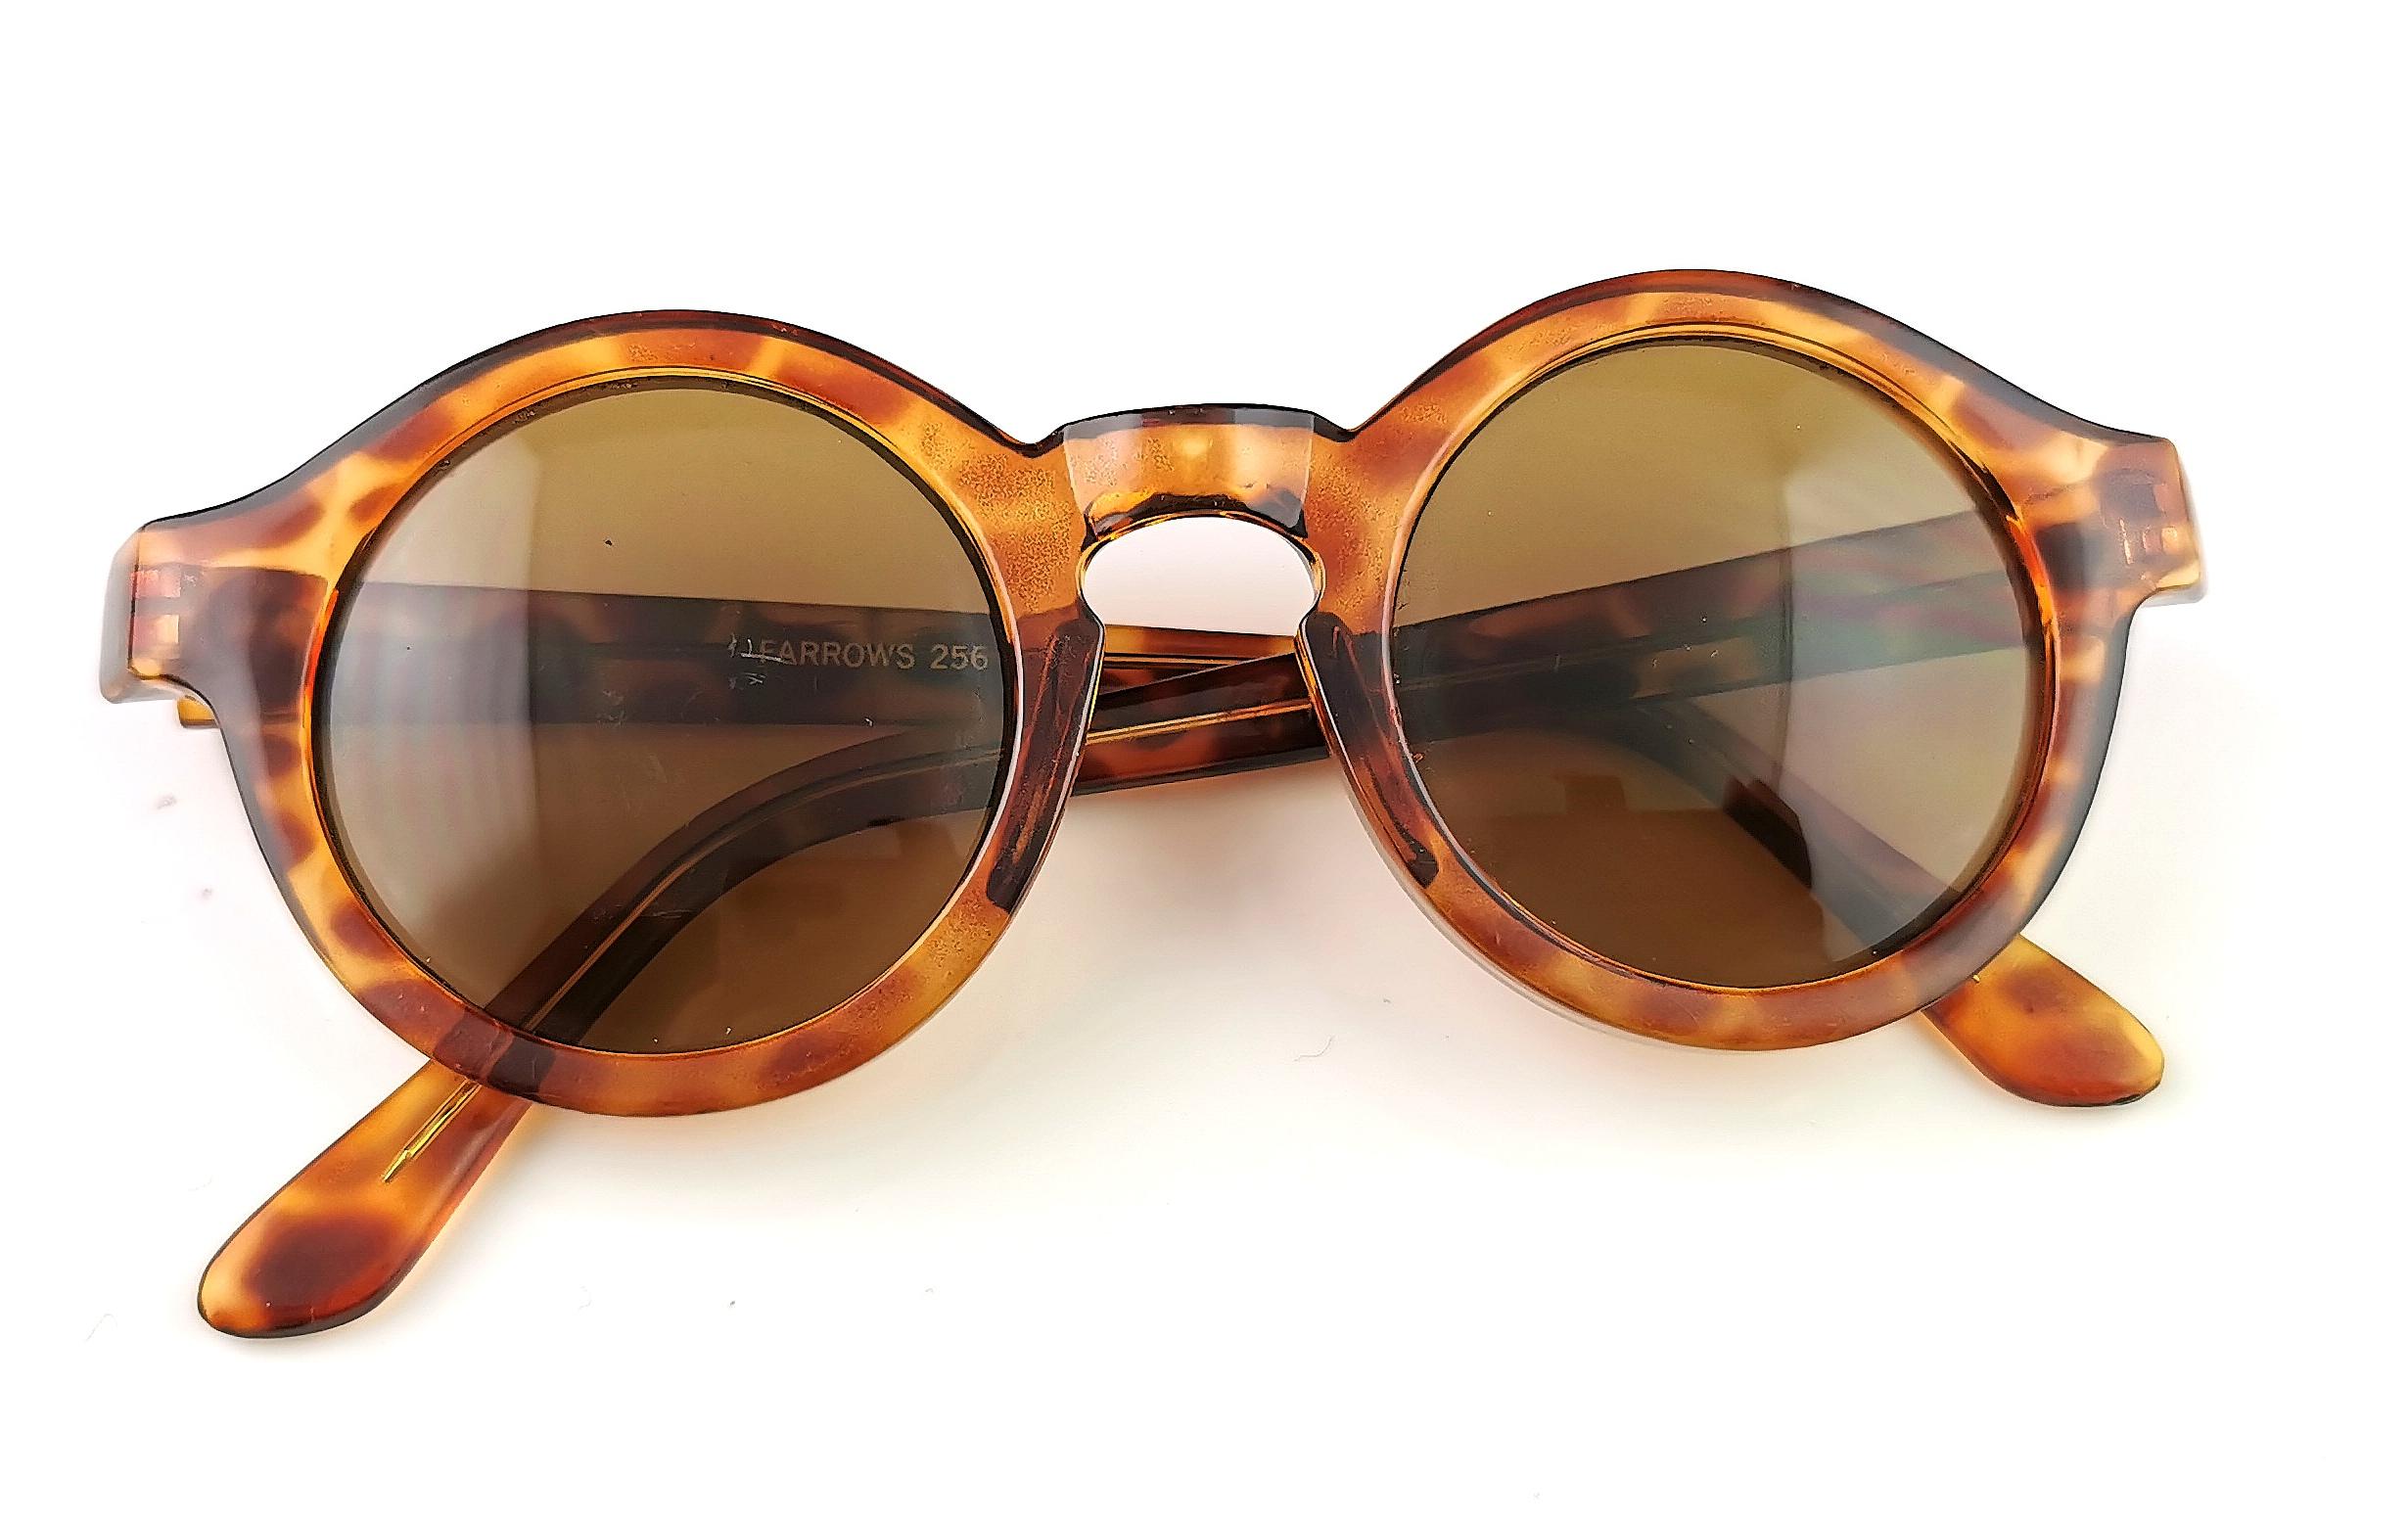 A fab pair of vintage retro style round framed sunglasses in a faux tortoiseshell acetate by Linda Farrow.

They are a lovely chunky pair of sunglasses, marked on the arm Farrow.

They have black tinted lenses.

These do not come with a case but